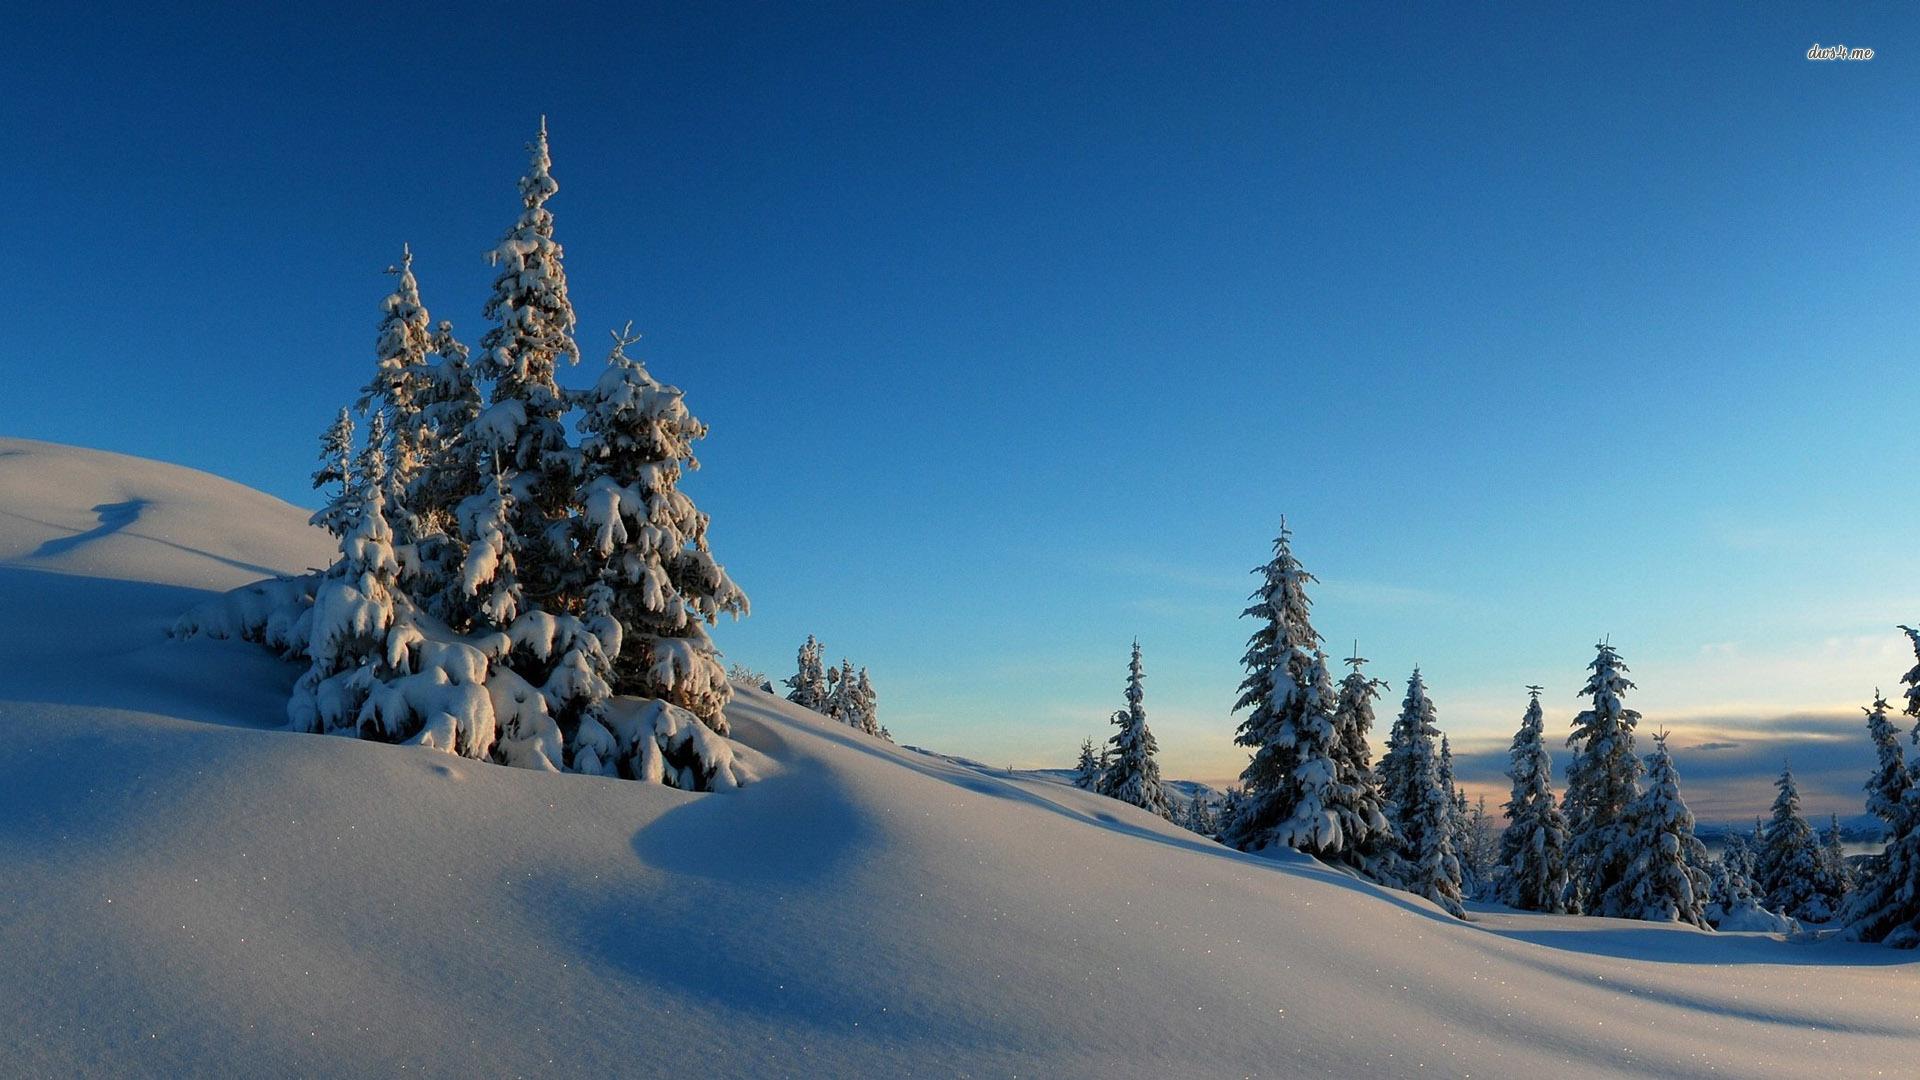 Sunny winter day in the snowy mountains wallpaper